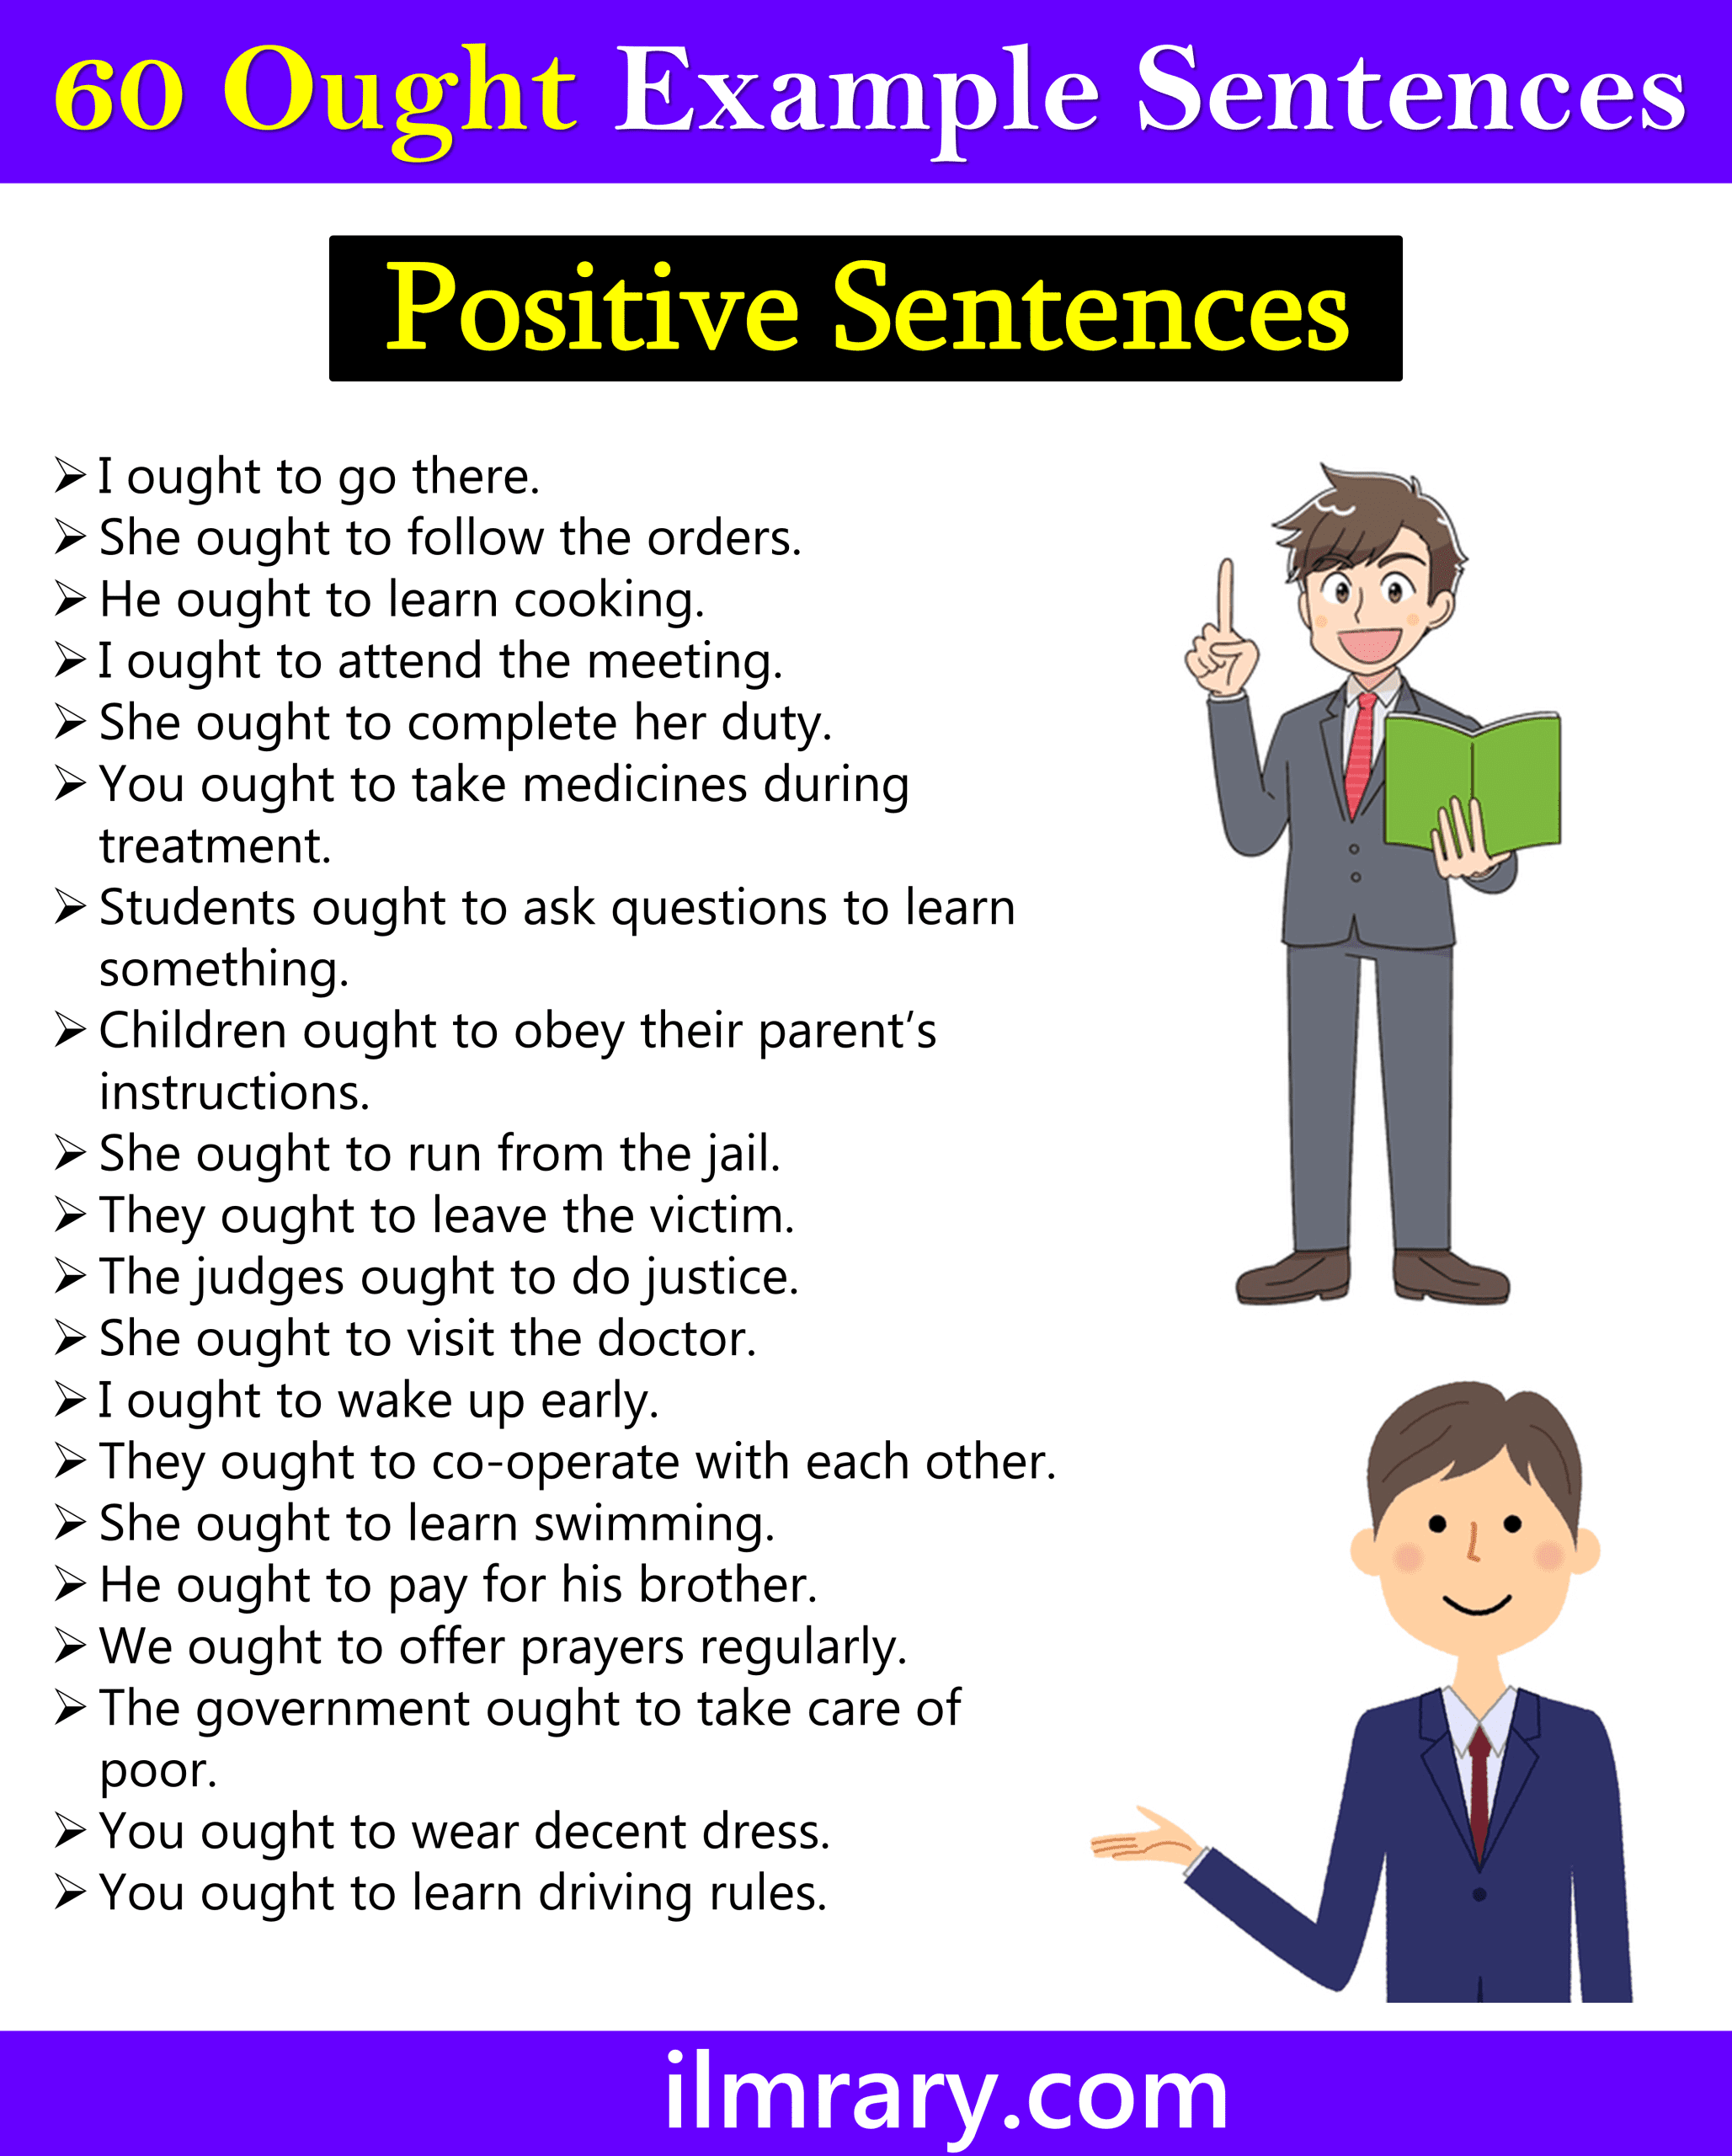 Ought to Use in Positive Sentences | 60 Example Sentences of Ought to